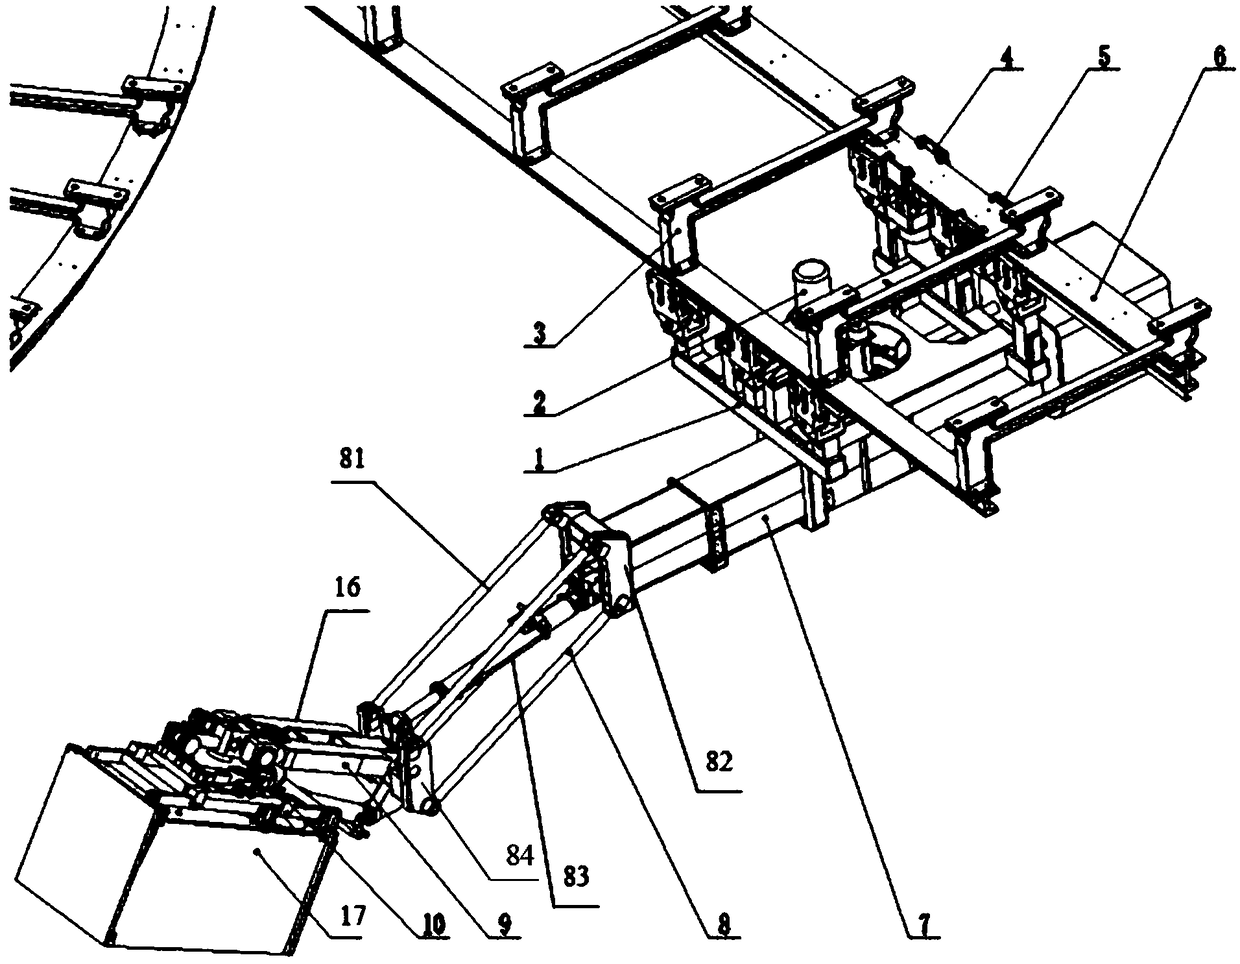 A mechanical arm device on a precision mounting rail